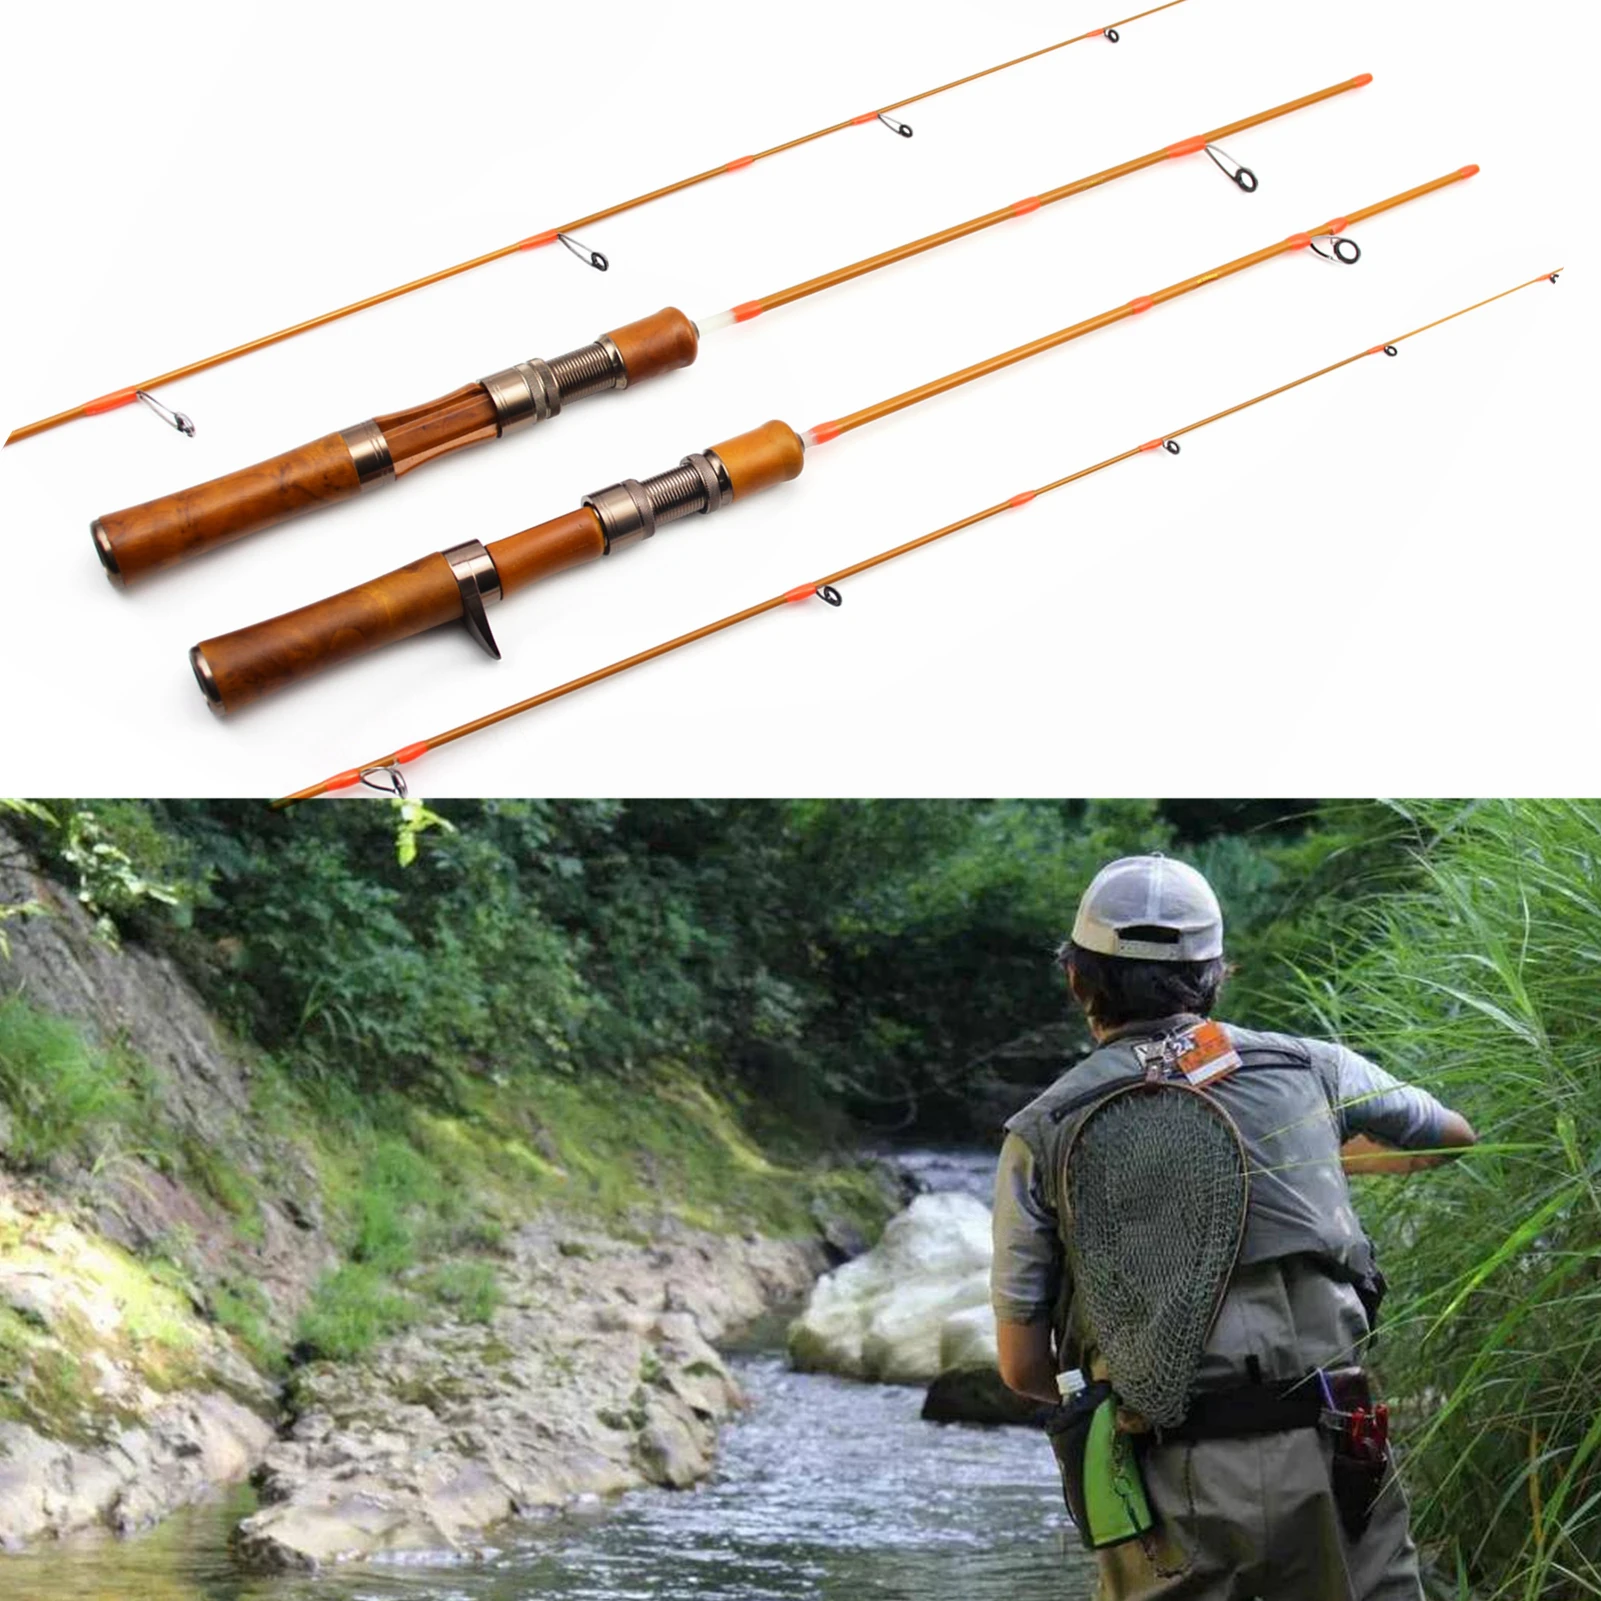 

NEW 1.4M Ul Slow Spinning Casting Lure Rod 1.5-8g Lure Ultralight Rods Ultra Light Solid Tips trout Stream Fishing pole pesca